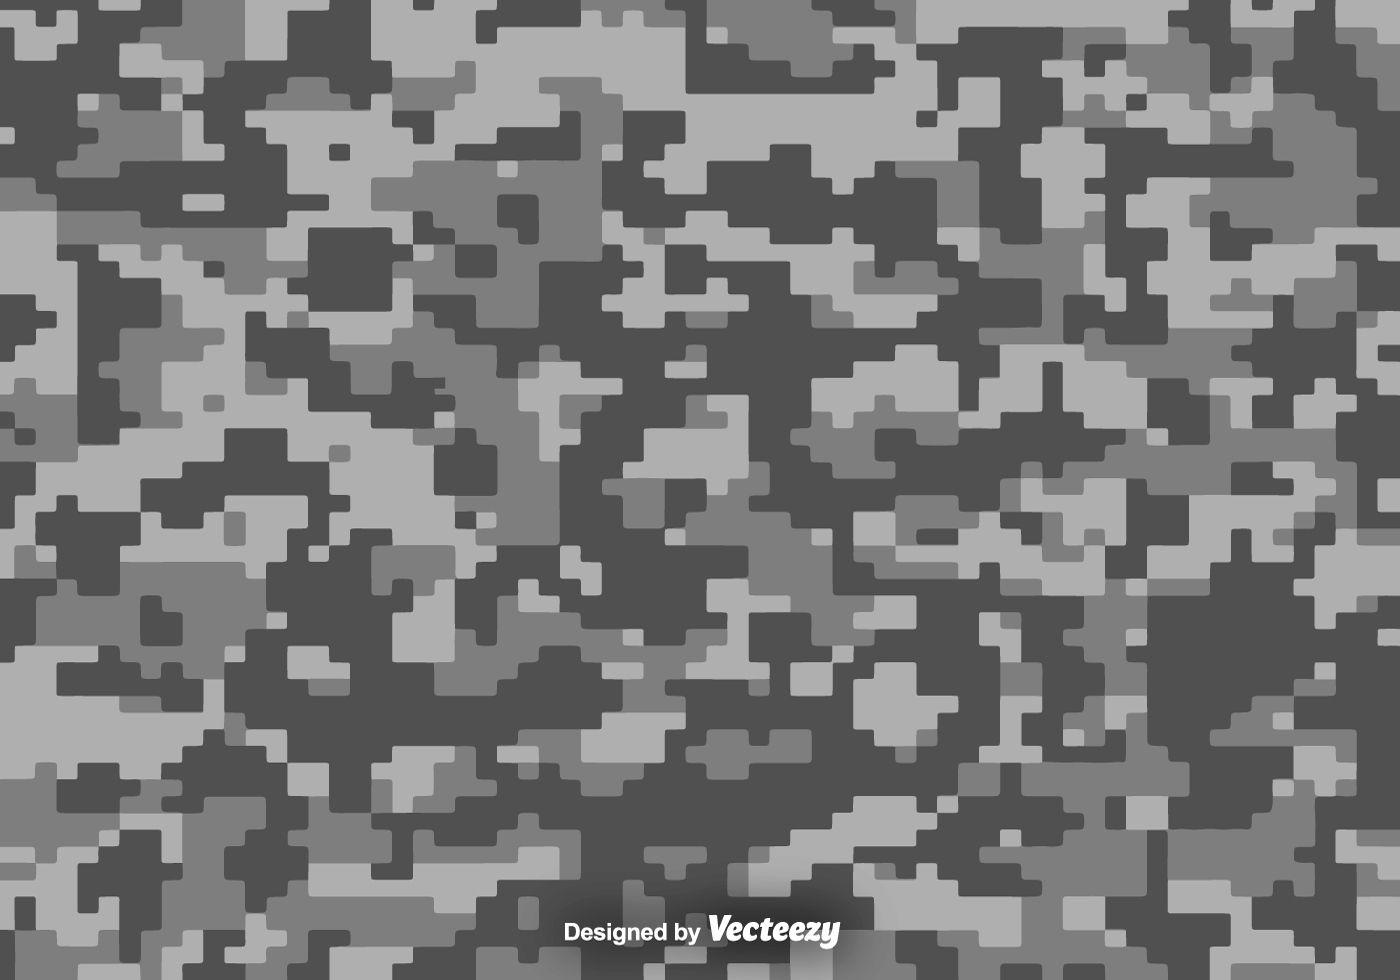 Camouflage Free Vector Art - (149 Free Downloads)